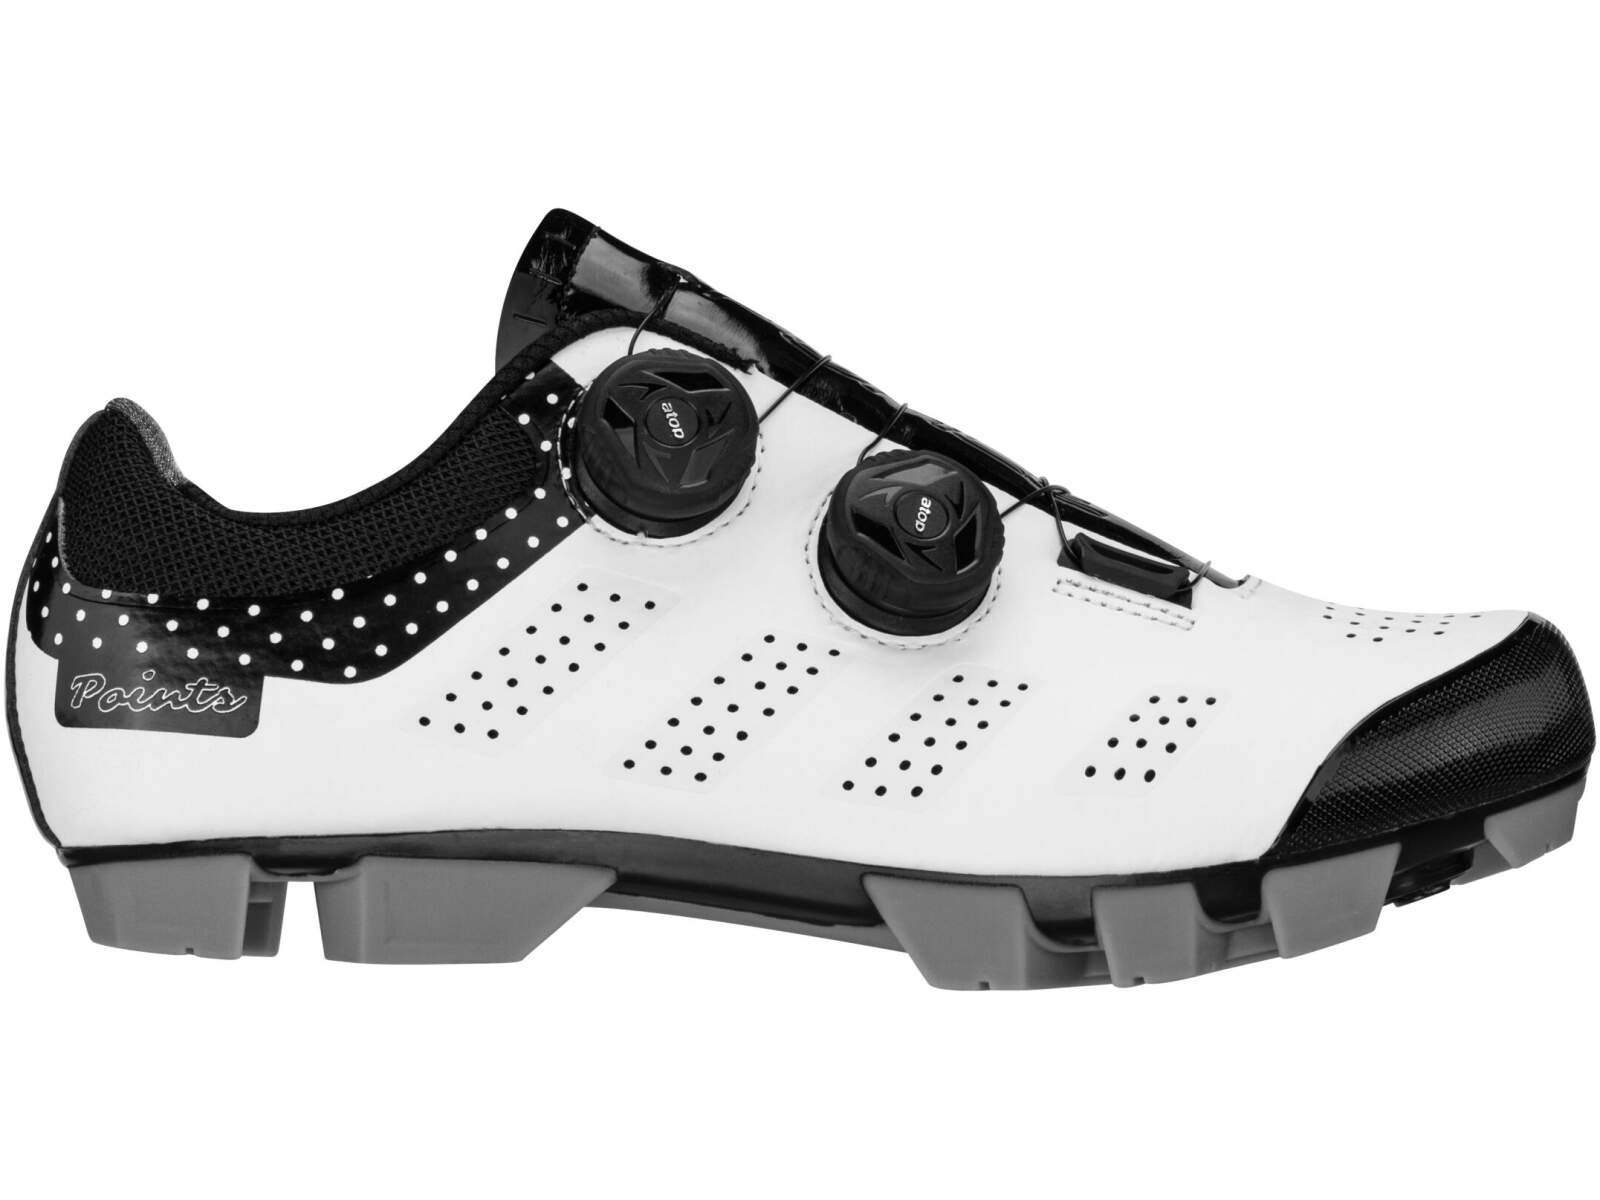 Buty rowerowe MTB FORCE POINTS LADY